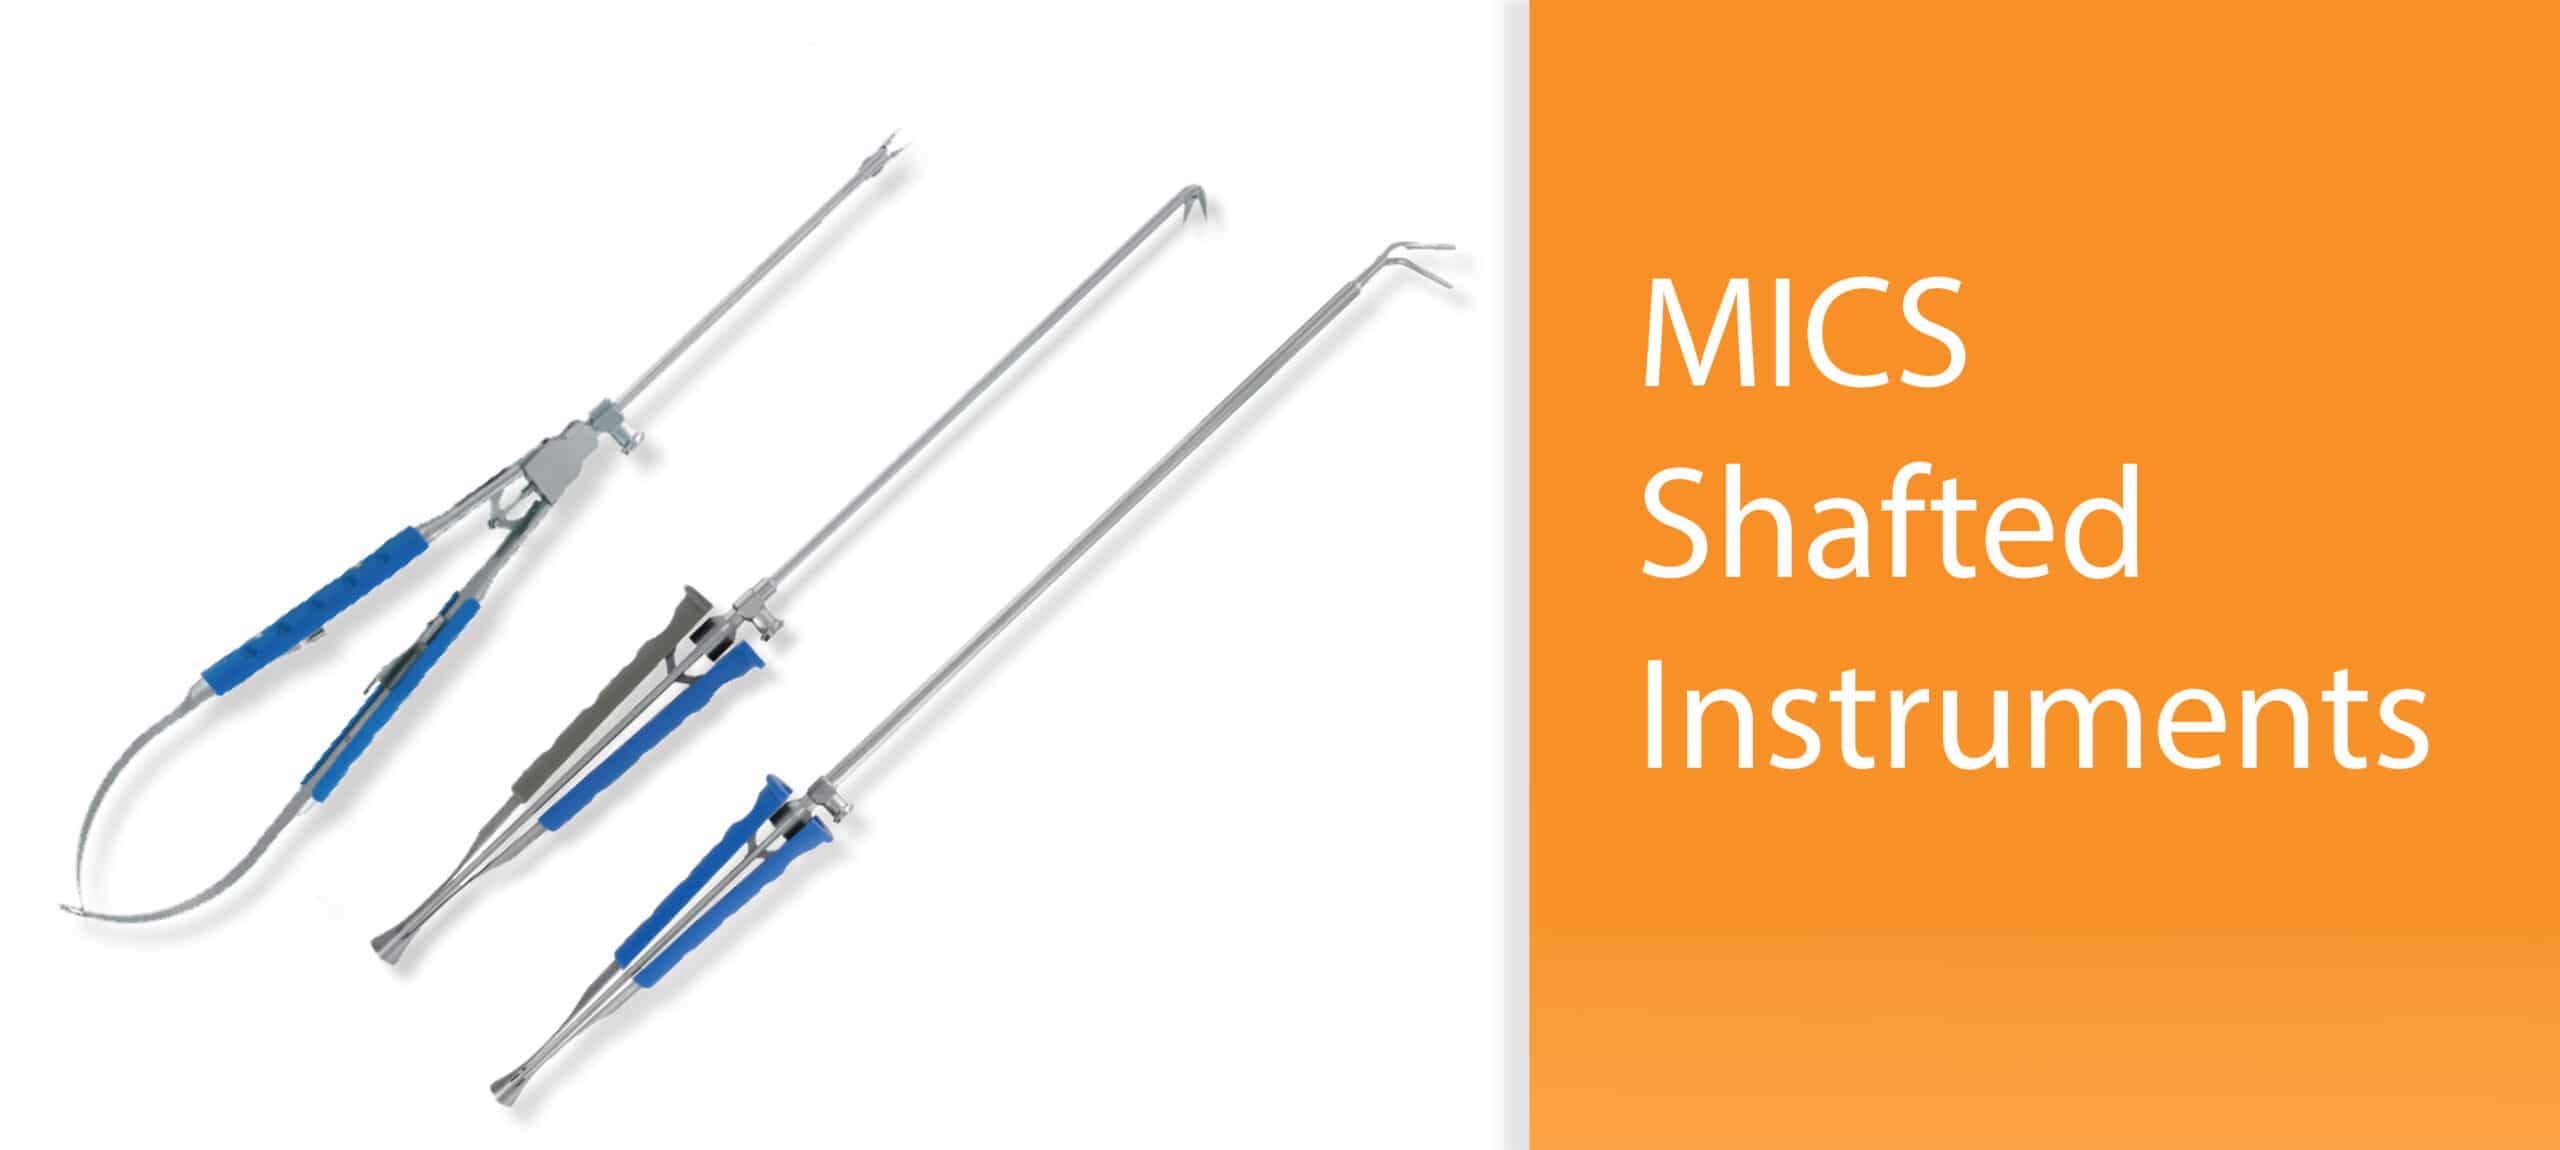 Delacroix-Chevalier MICS Shafted Instruments for Coronary procedures